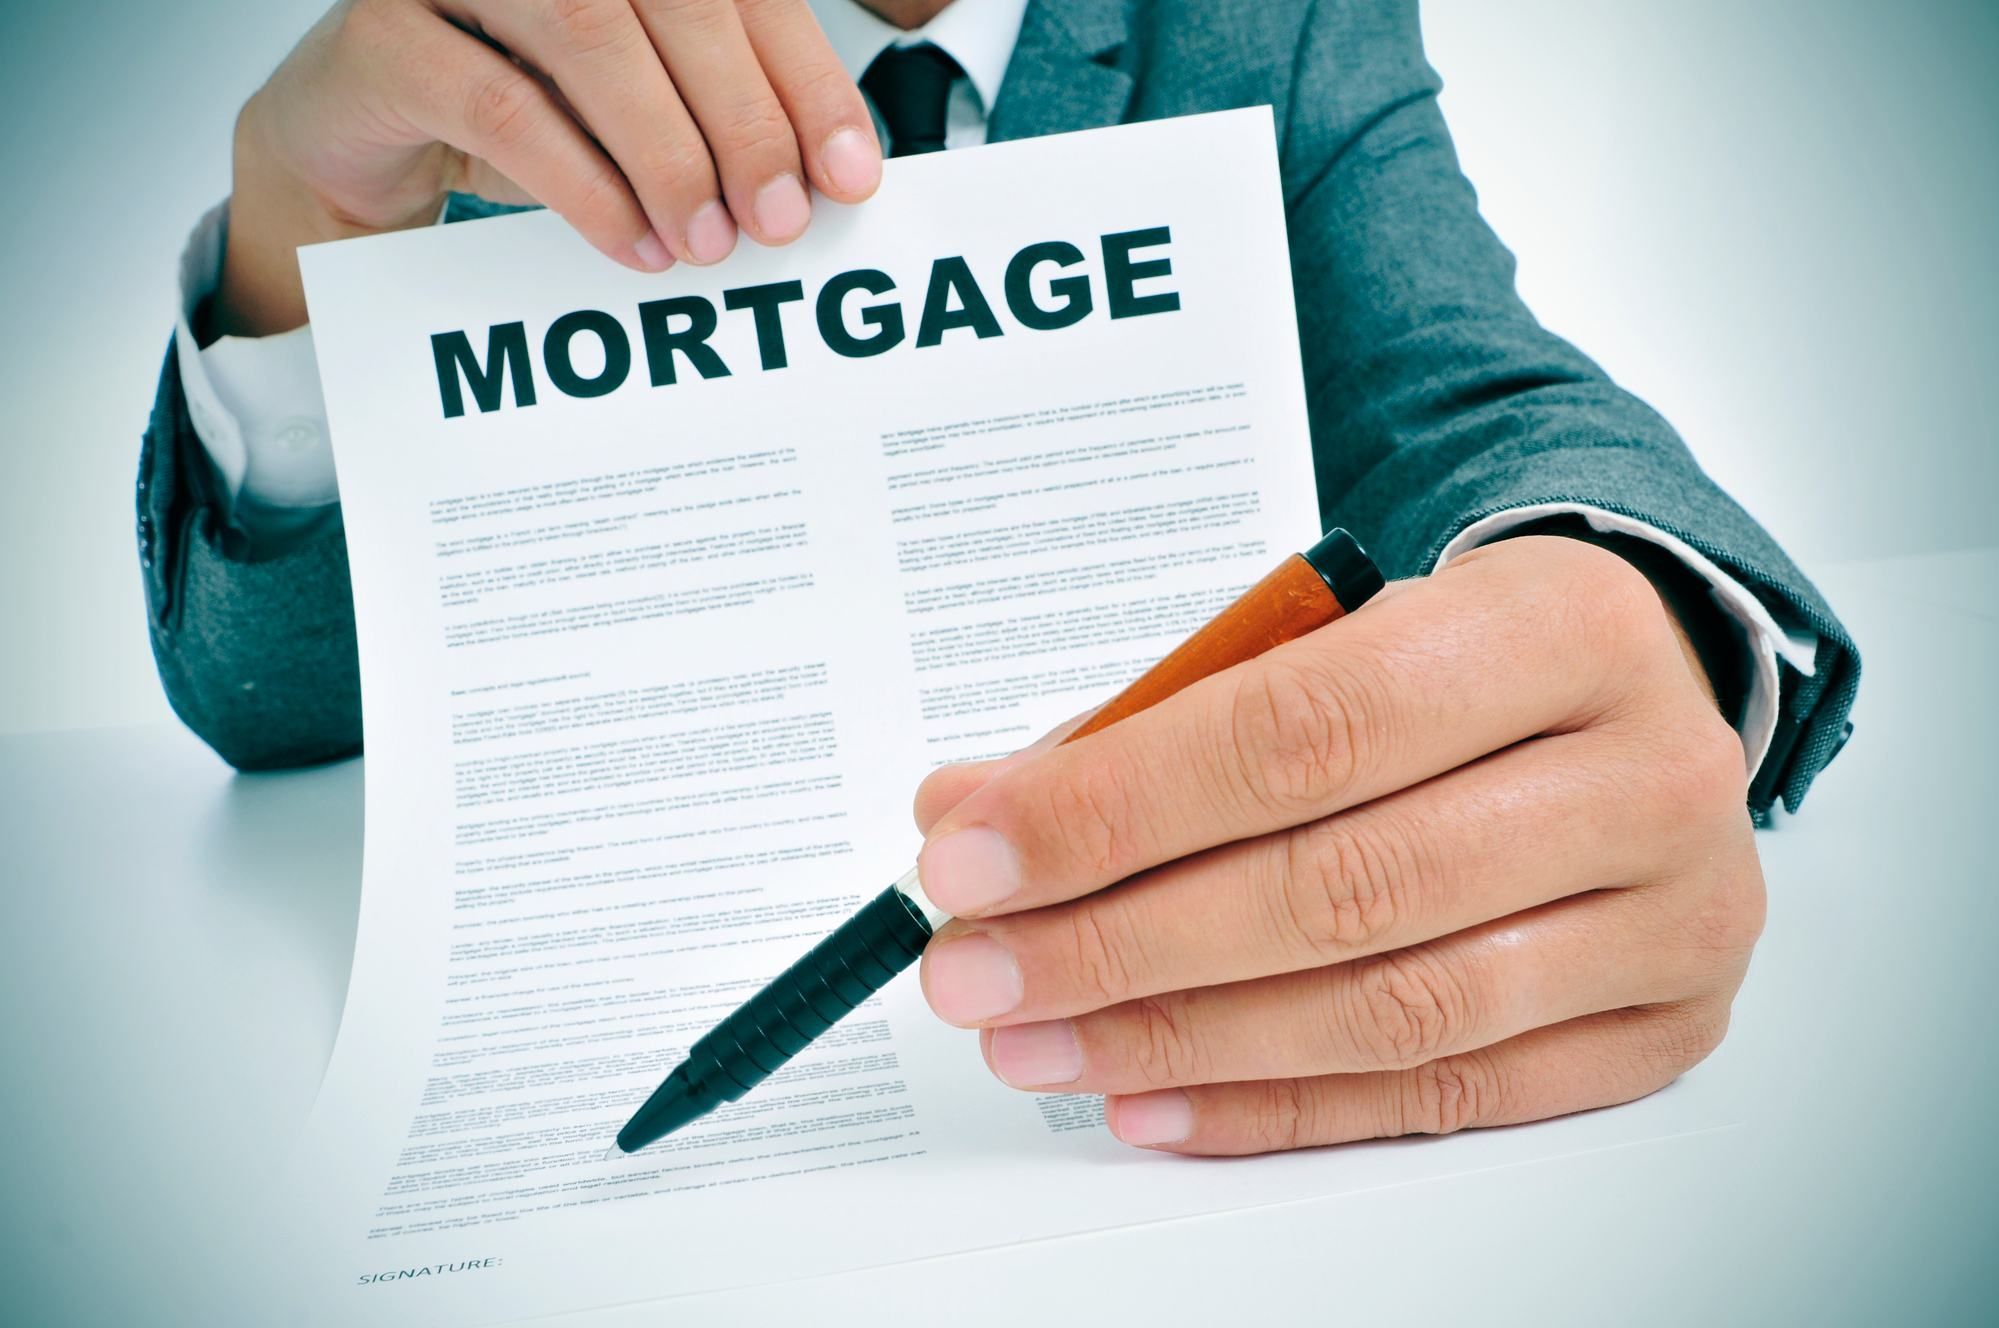 How to file a complaint against a mortgage lender